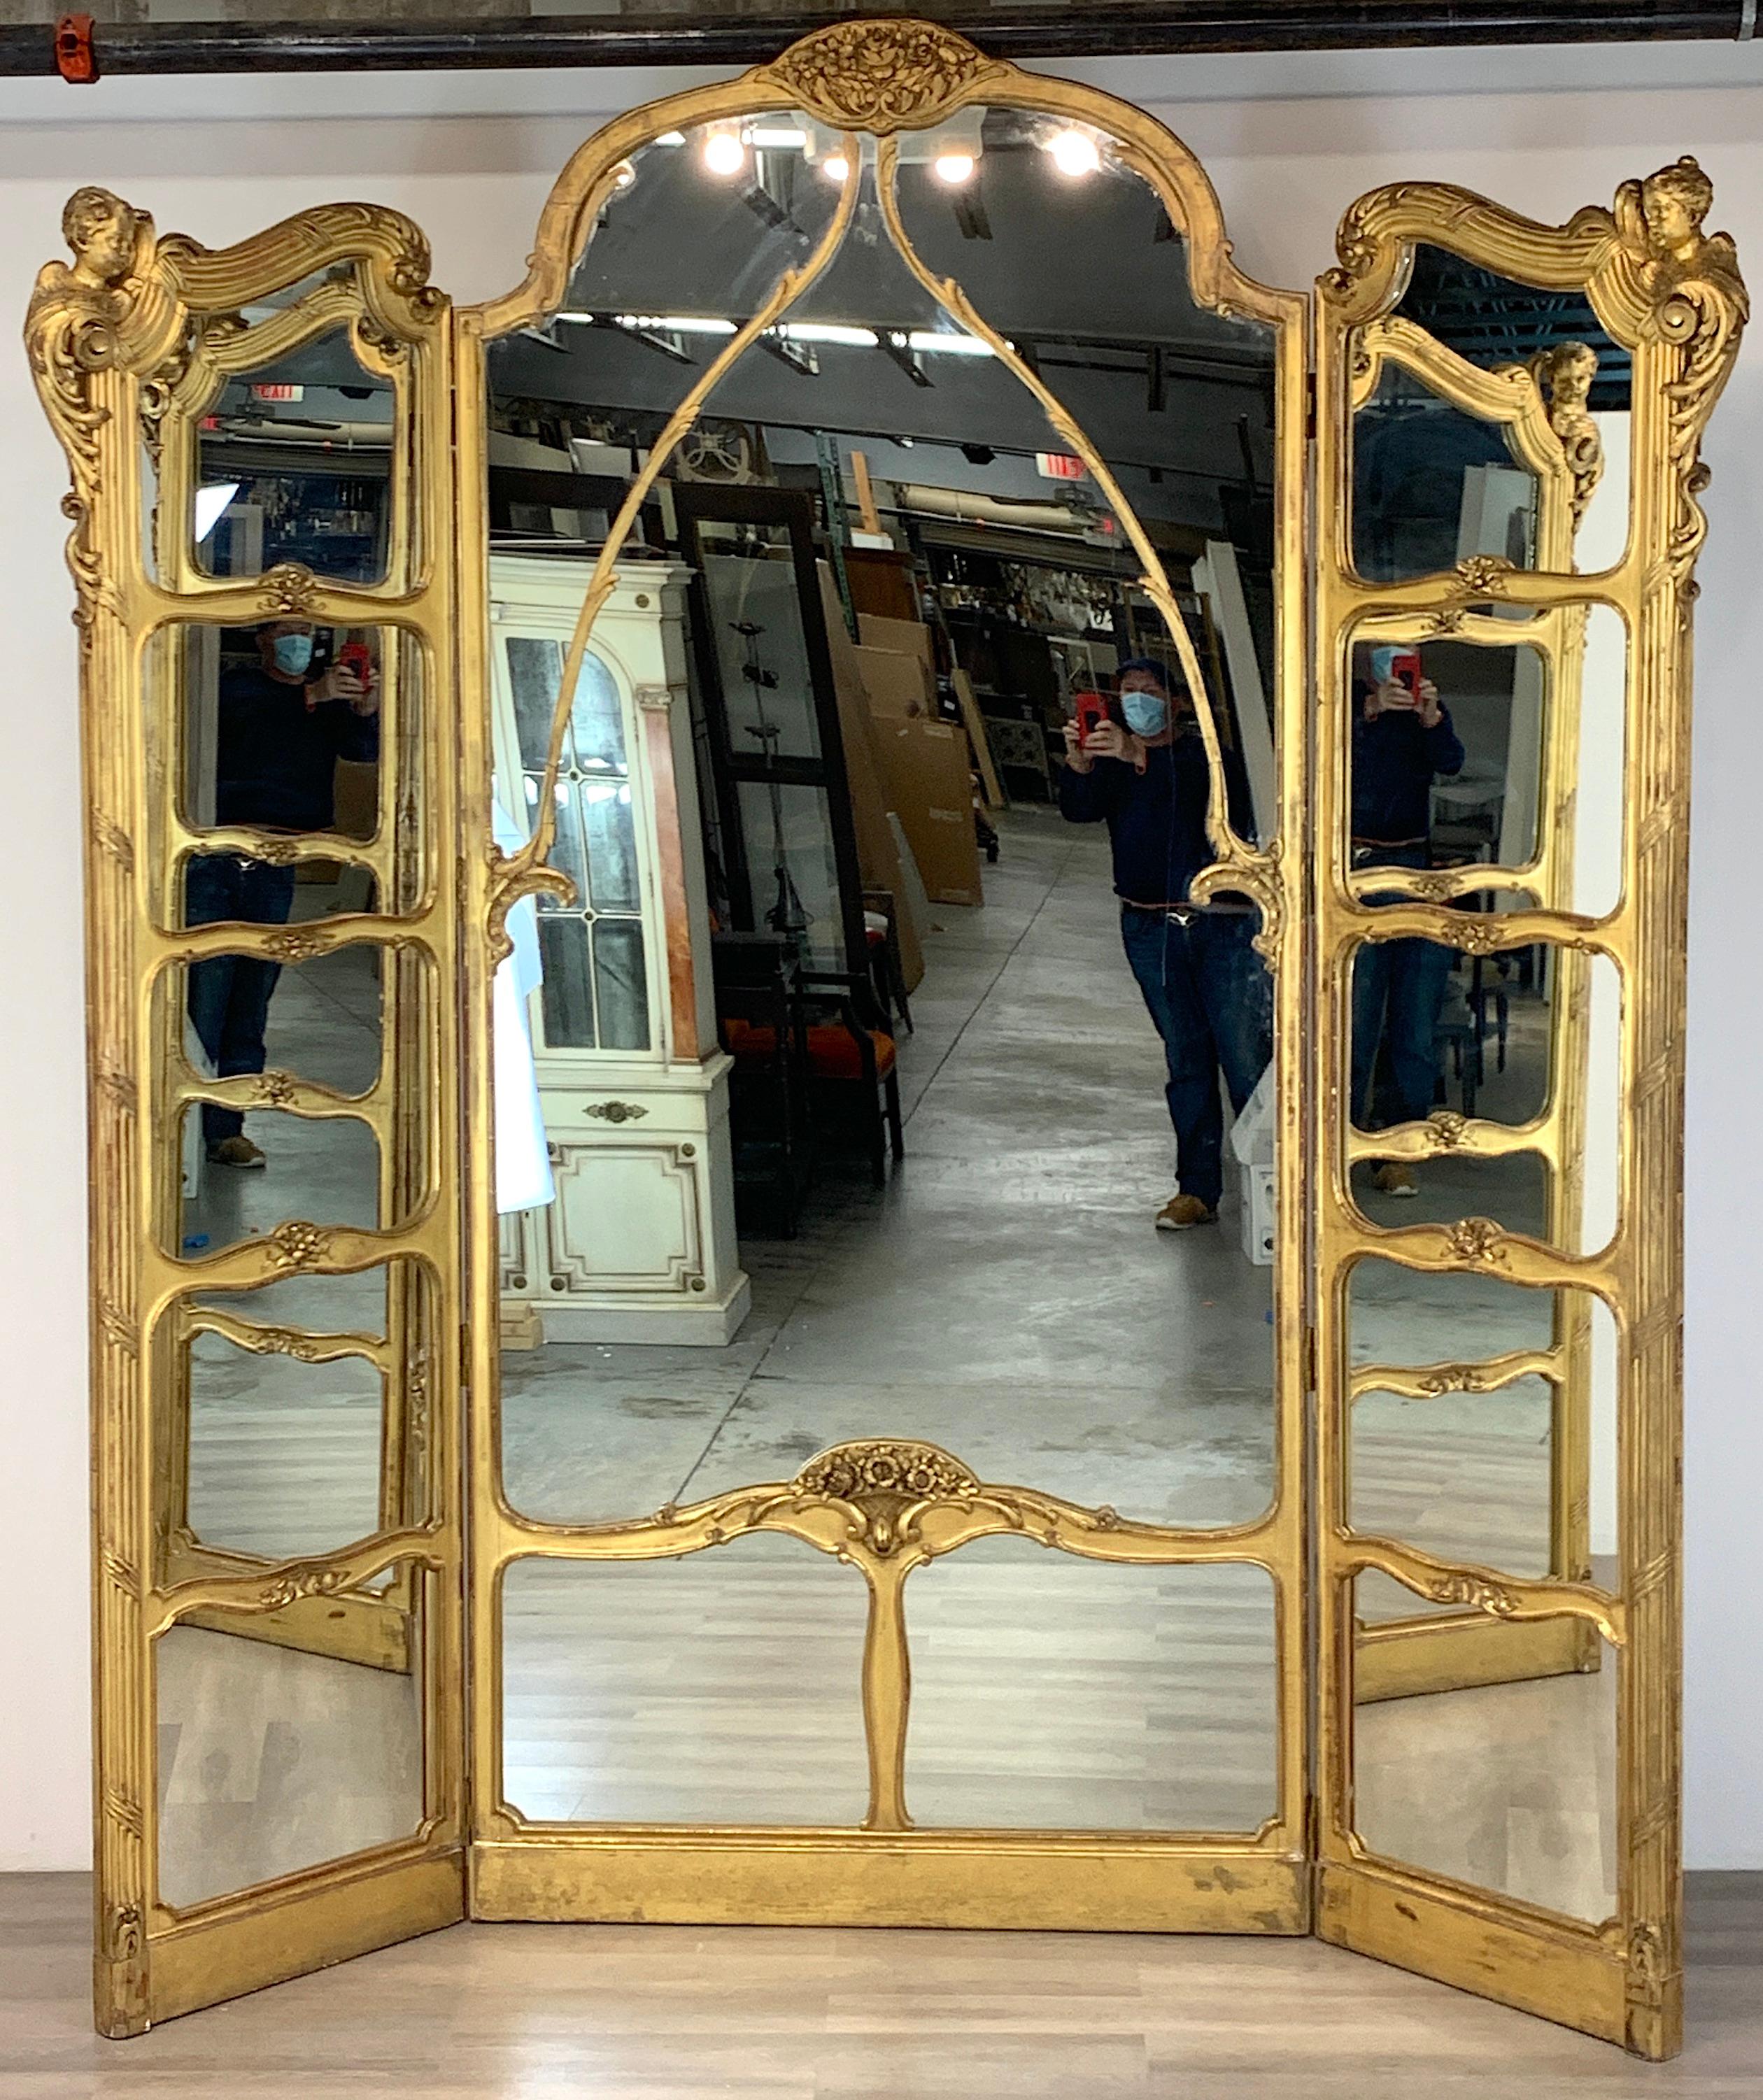 Monumental Belle Époque carved giltwood dressing mirror, Paris, circa 1880, subtle and sublime three-panel giltwood mirror screen. The center panel measures 9 feet high x 4 feet wide. The two flanking carved cherub panels measure 8 feet high x 2